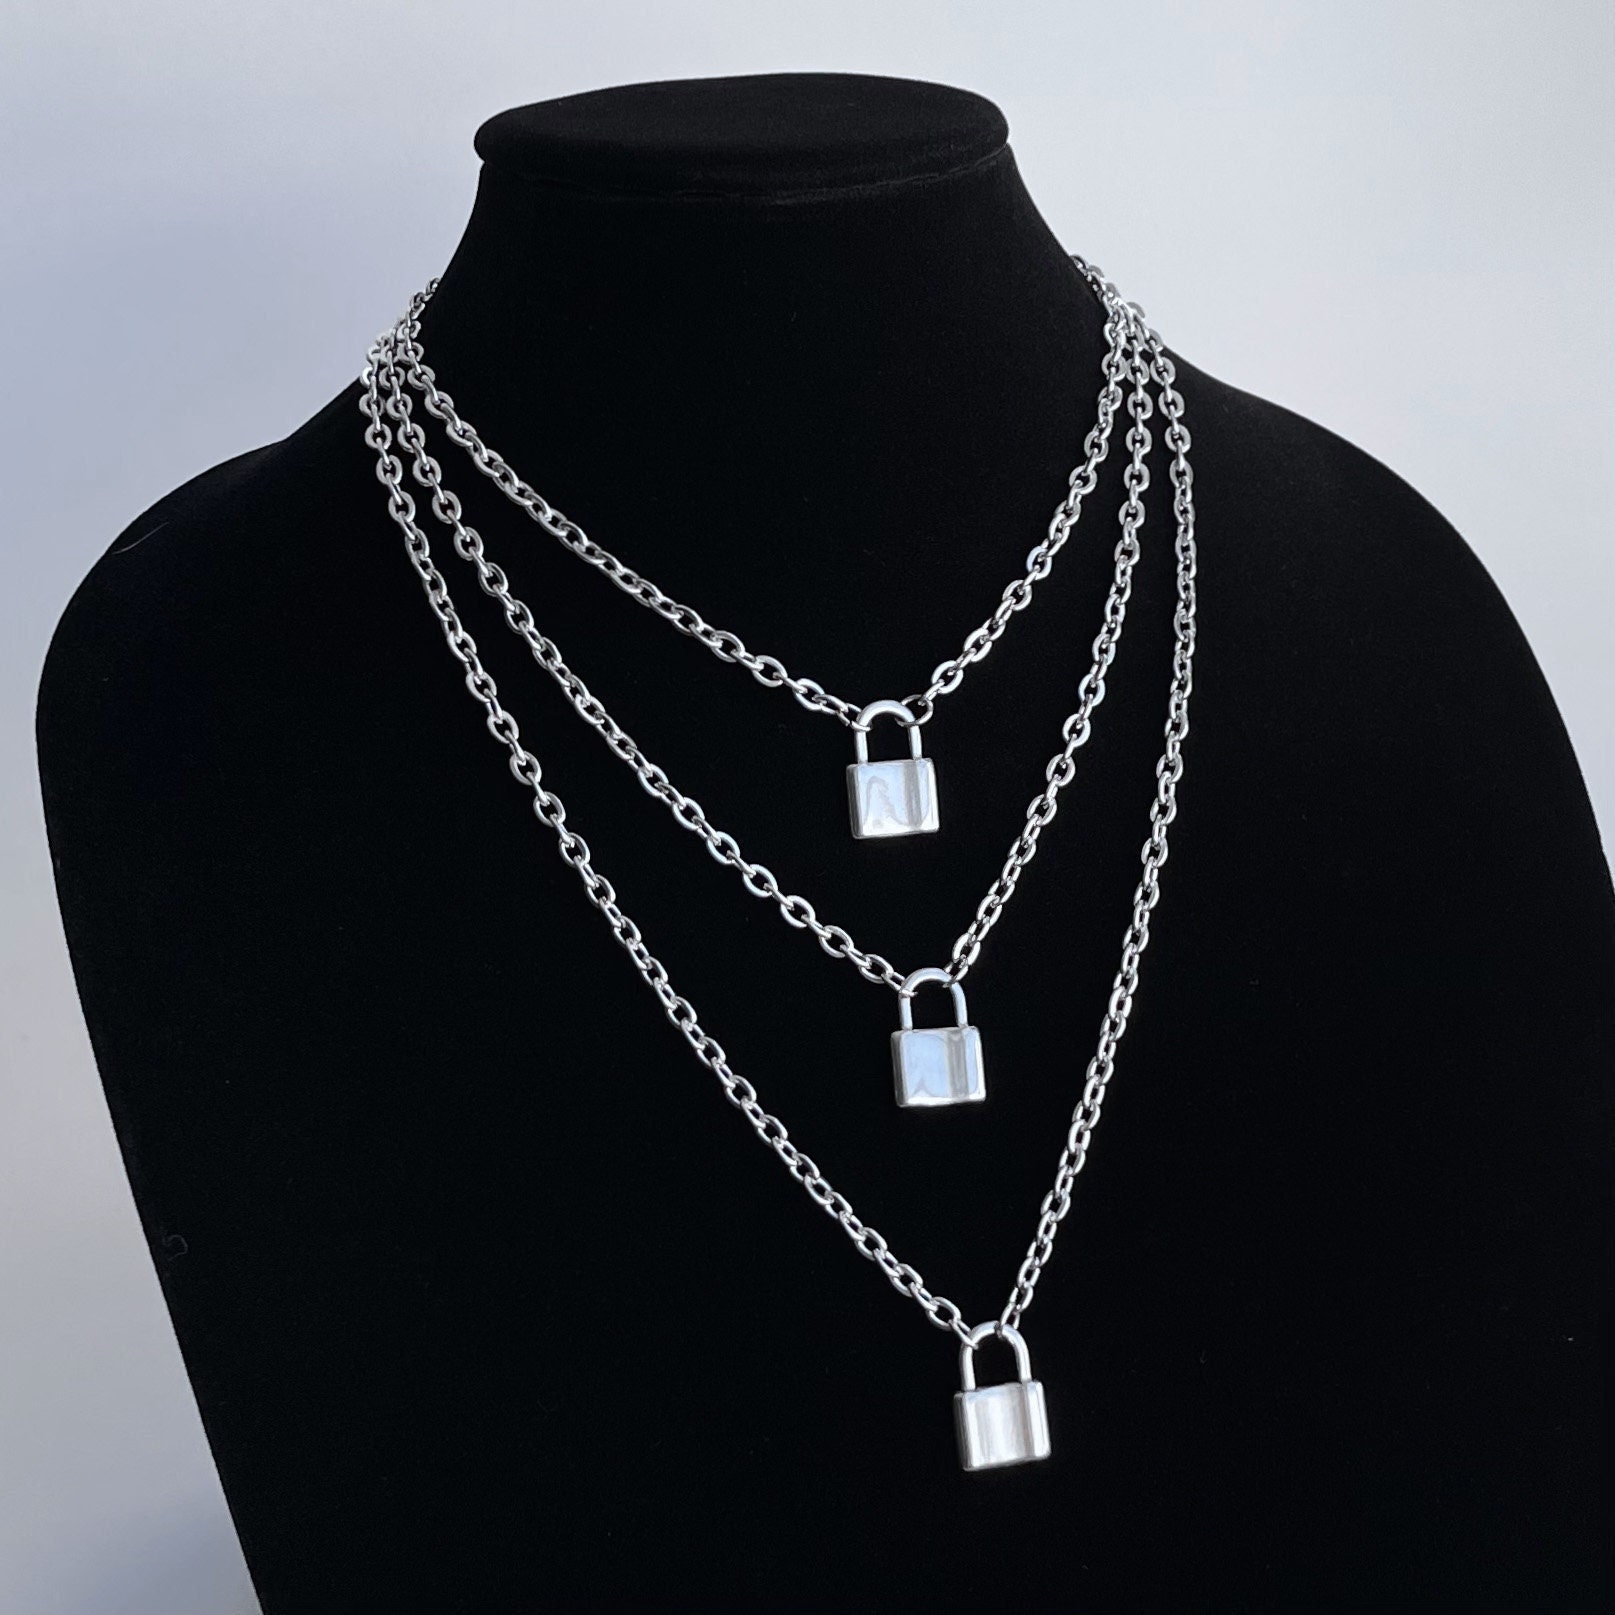  Yheakne Boho Rhinestone Lock Pendant Necklace Silver Paper Clip  Chain Choker Necklace Cz Paved Padlock Necklace Circle T Bar Toggle Necklace  Chain Jewelry for Women and Girls (Silver) : Clothing, Shoes